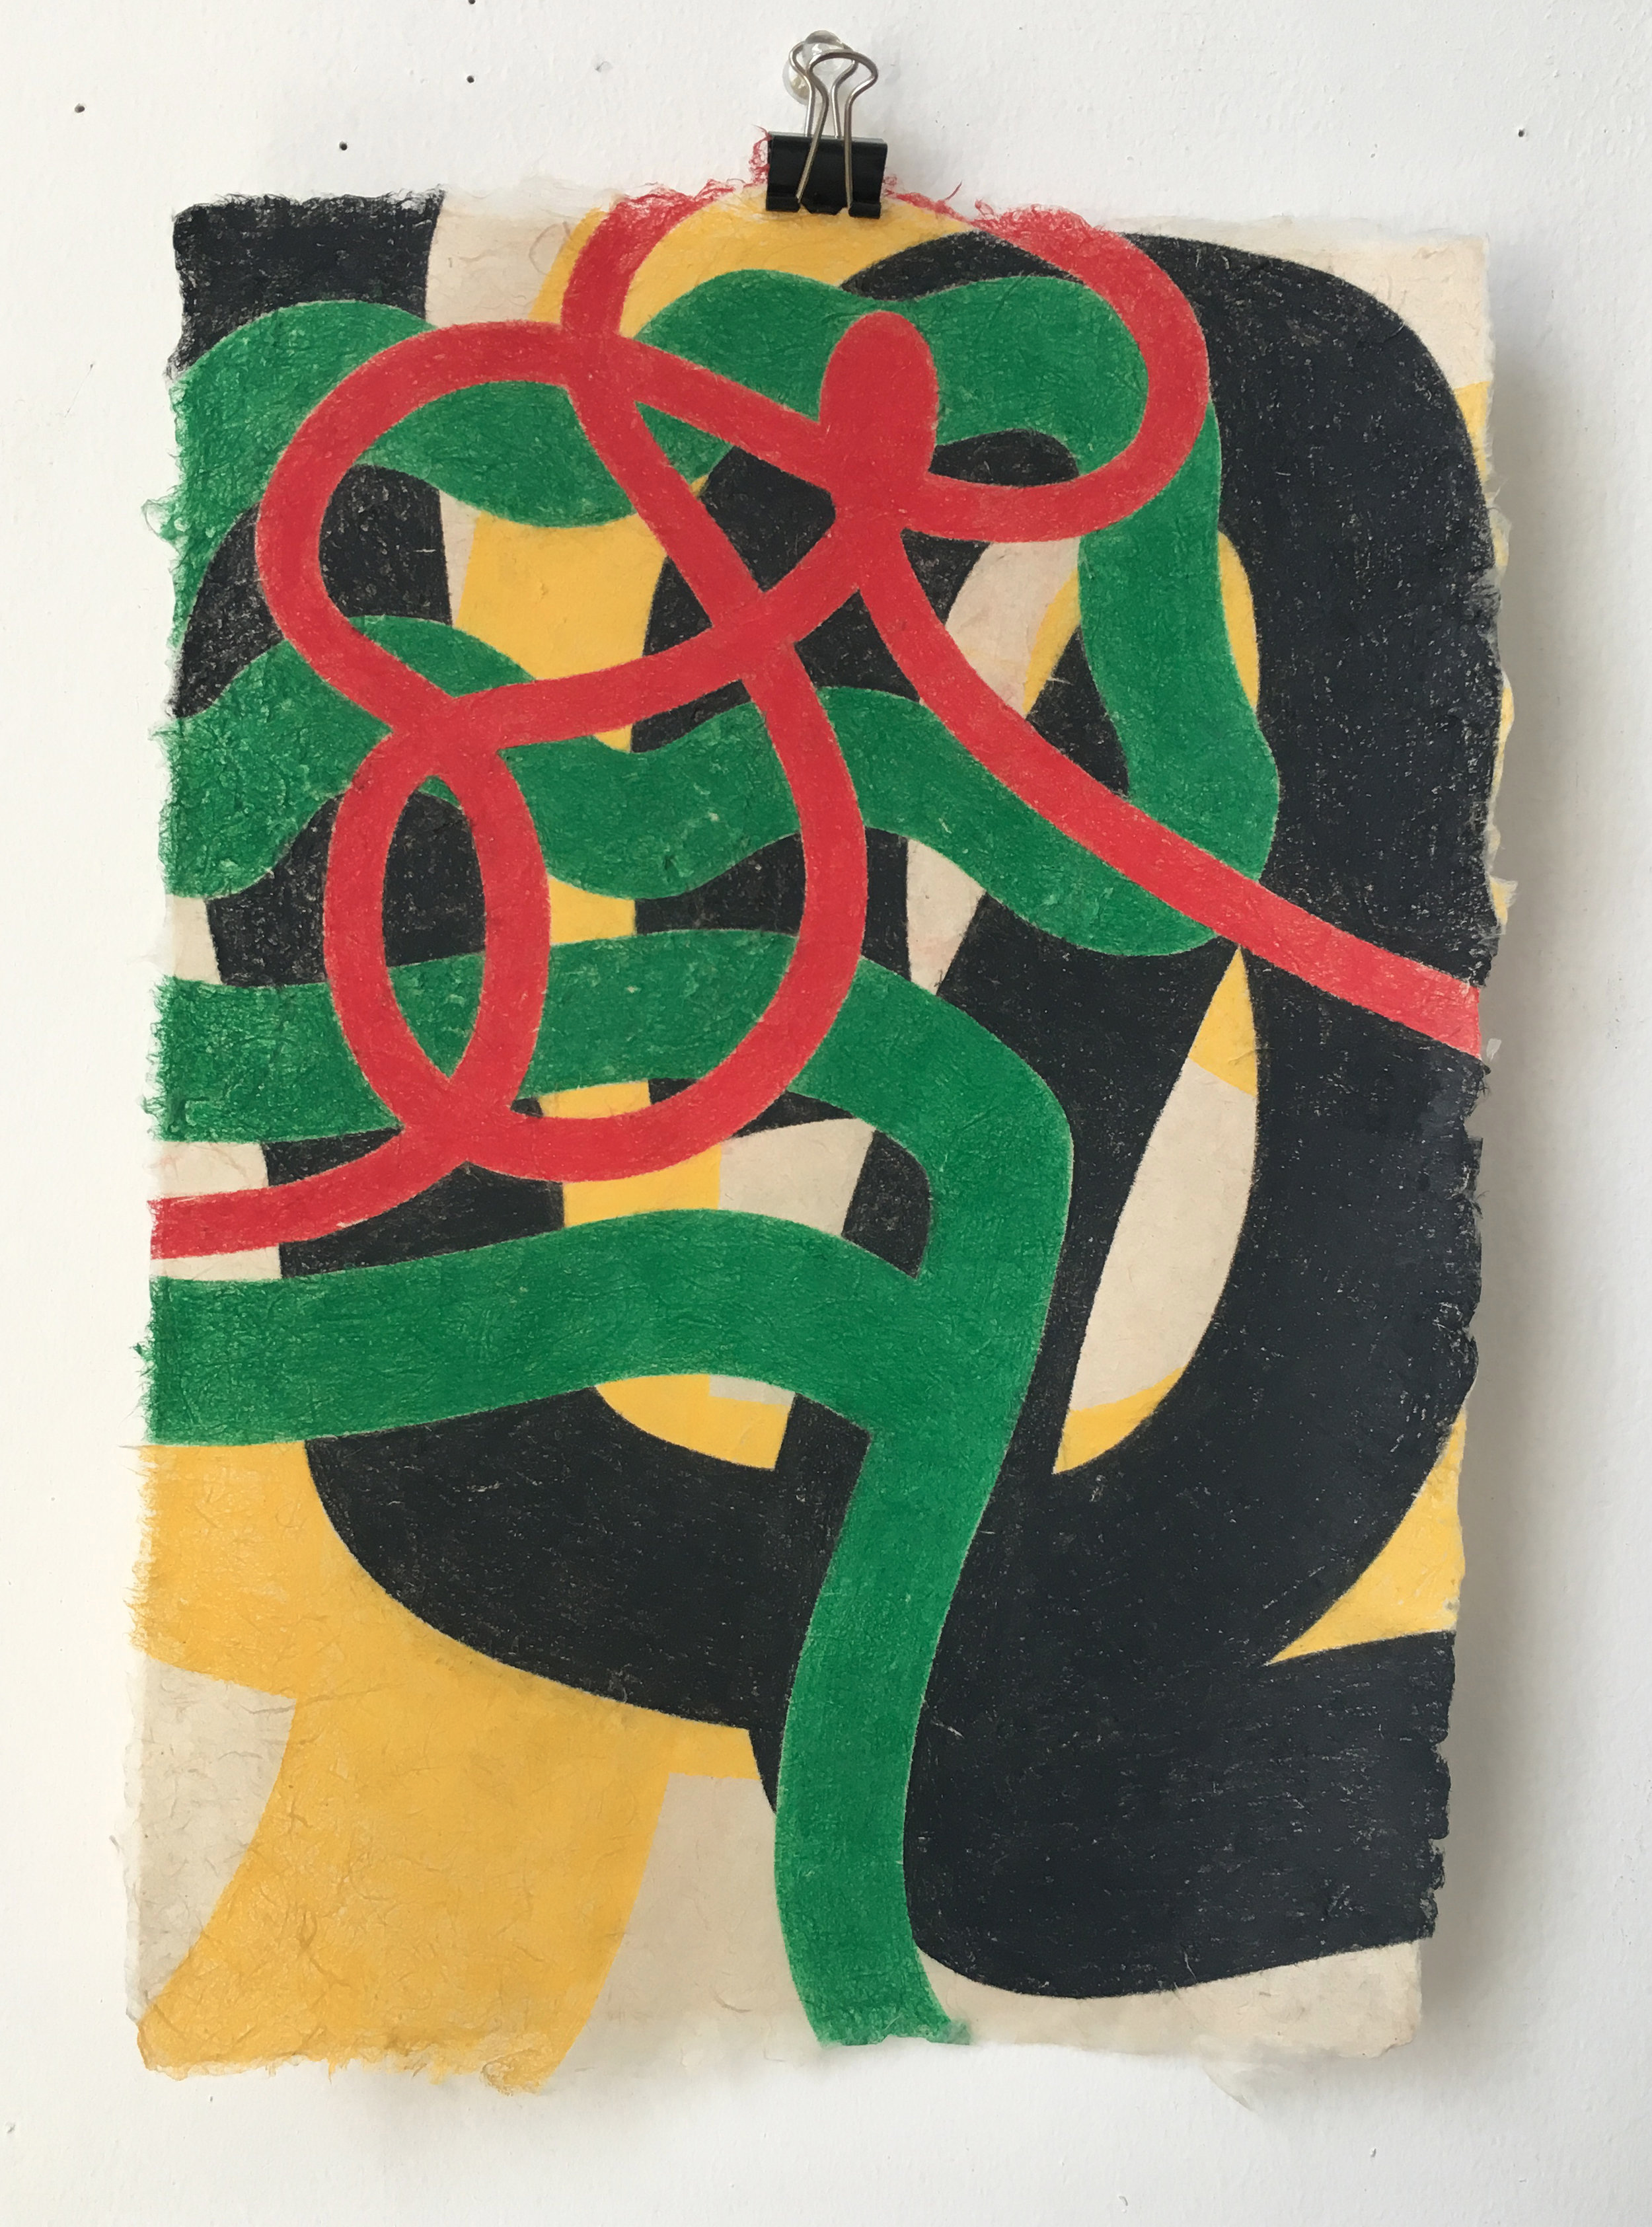 Untitled (Red, Green, Black and Yellow)